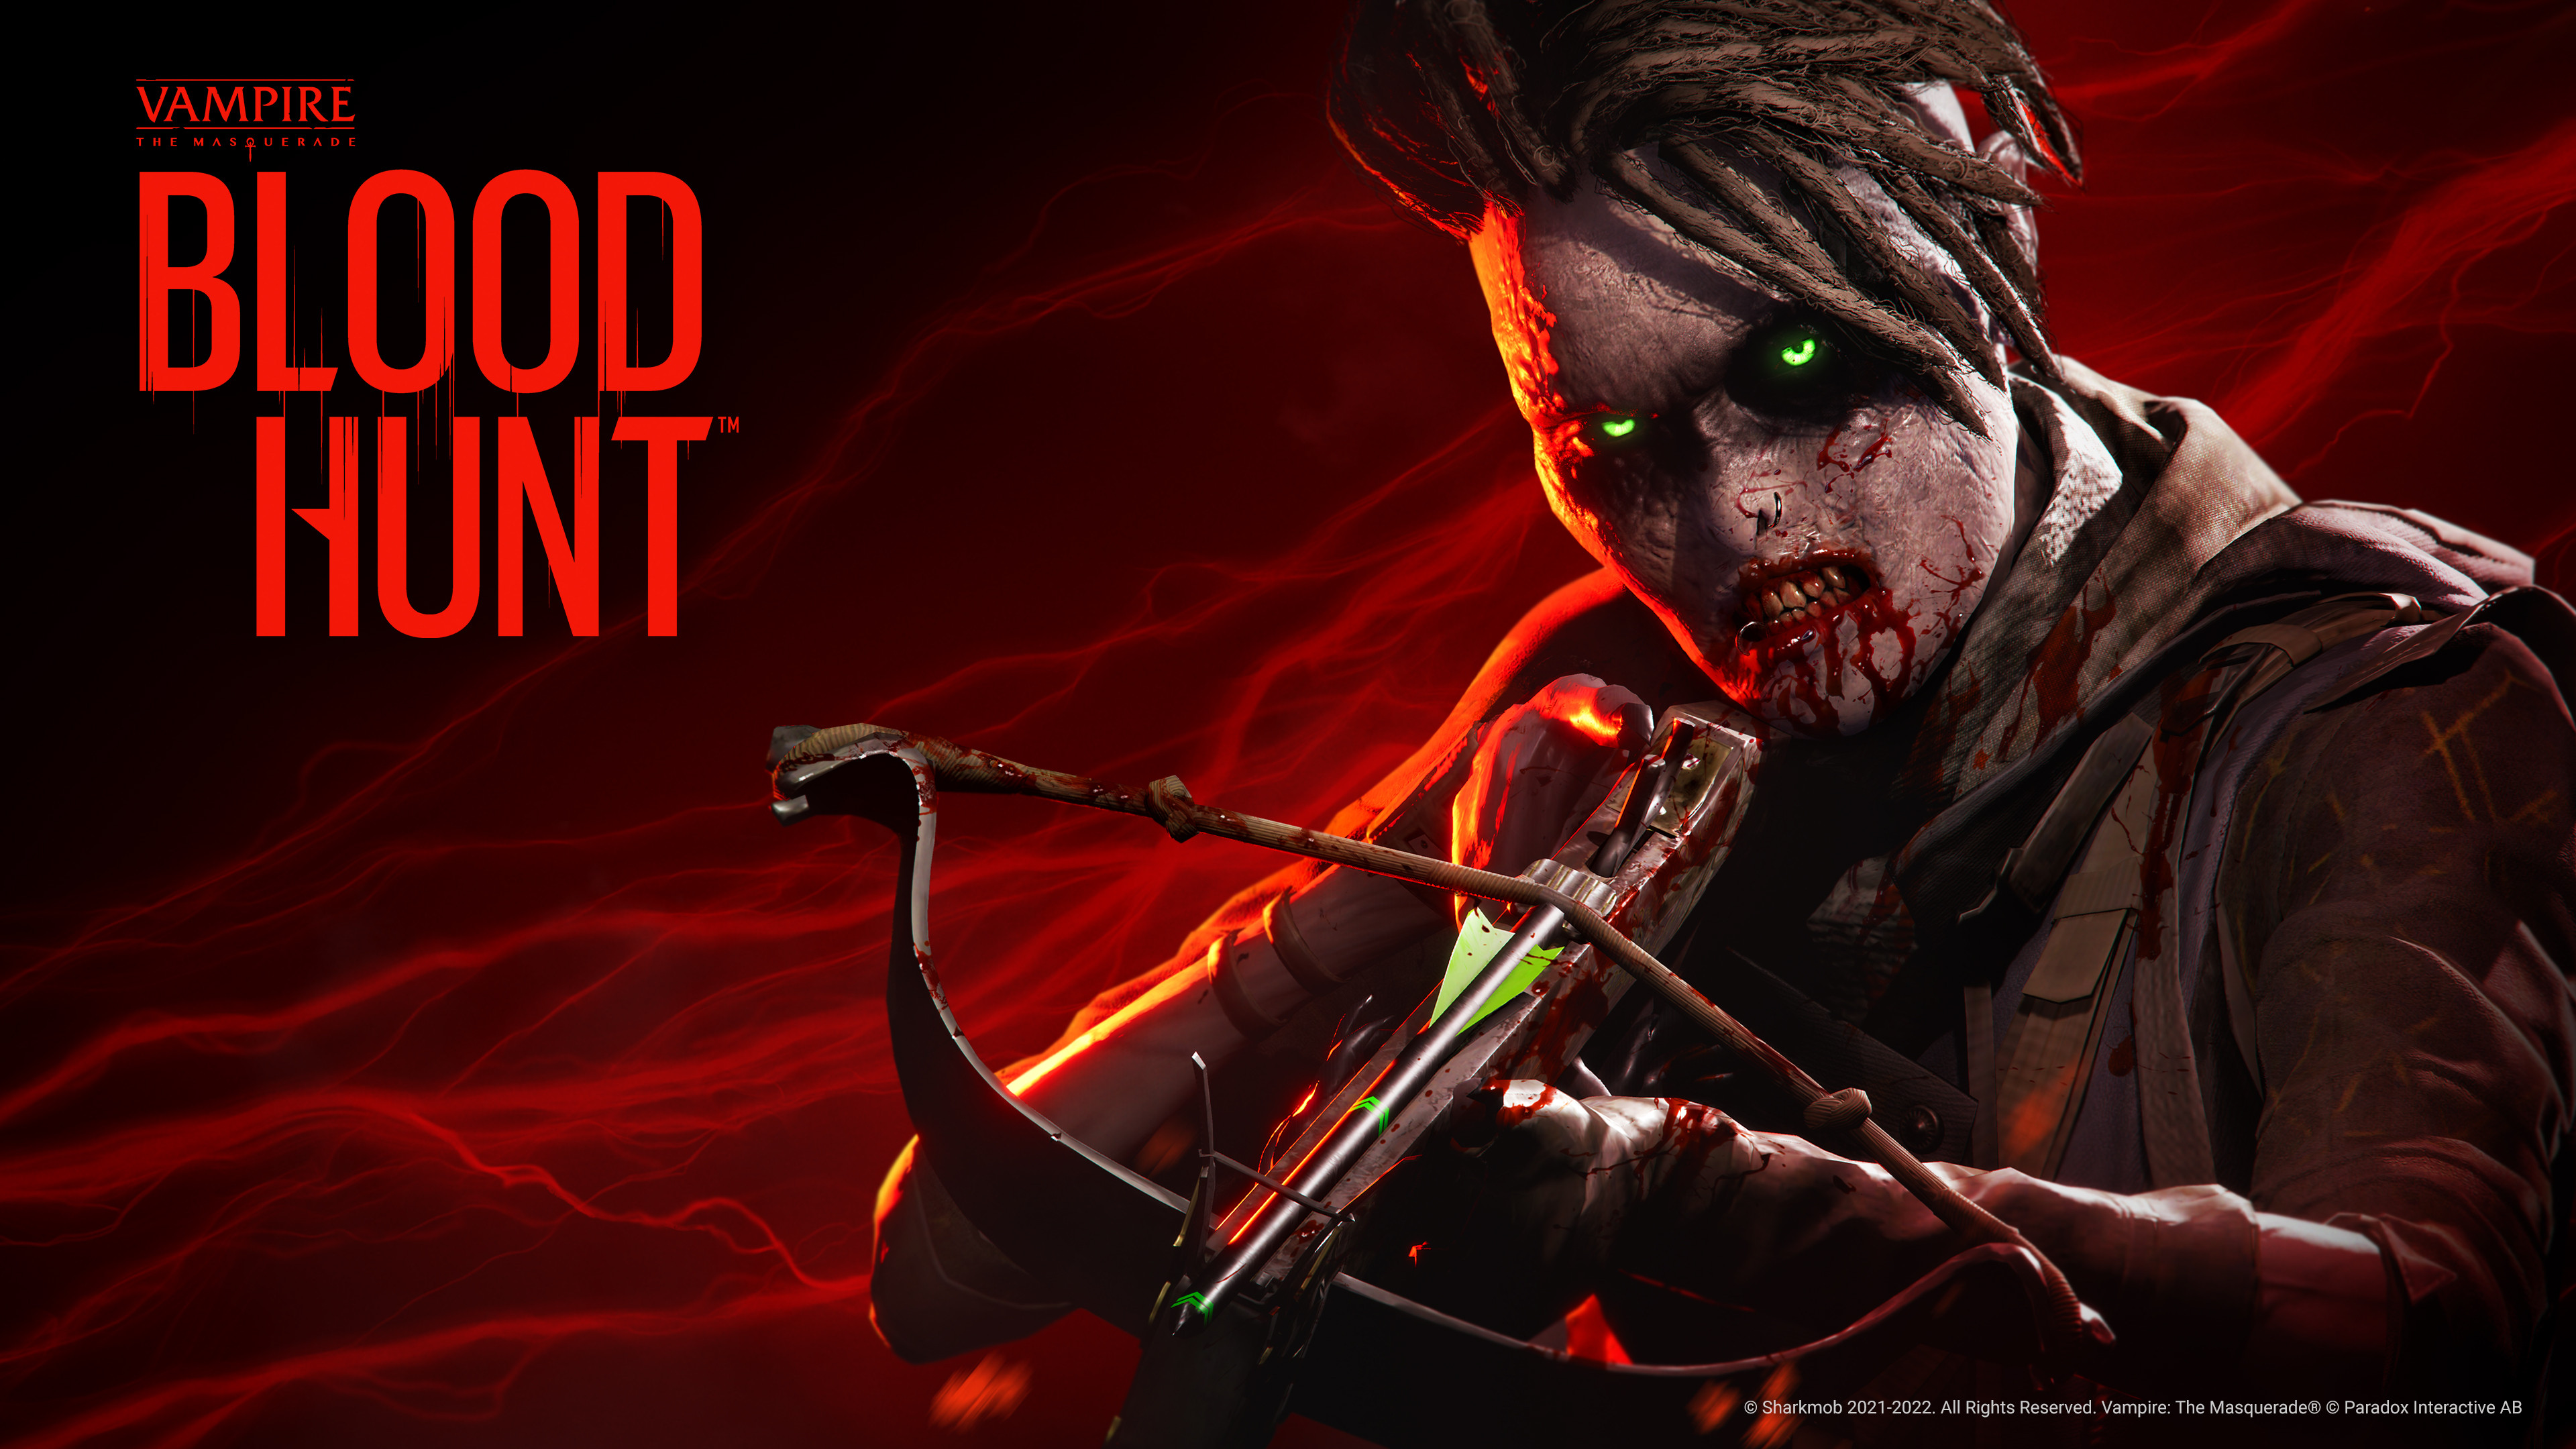 Video Game Vampire: The Masquerade - Bloodhunt HD Wallpaper | Background Image